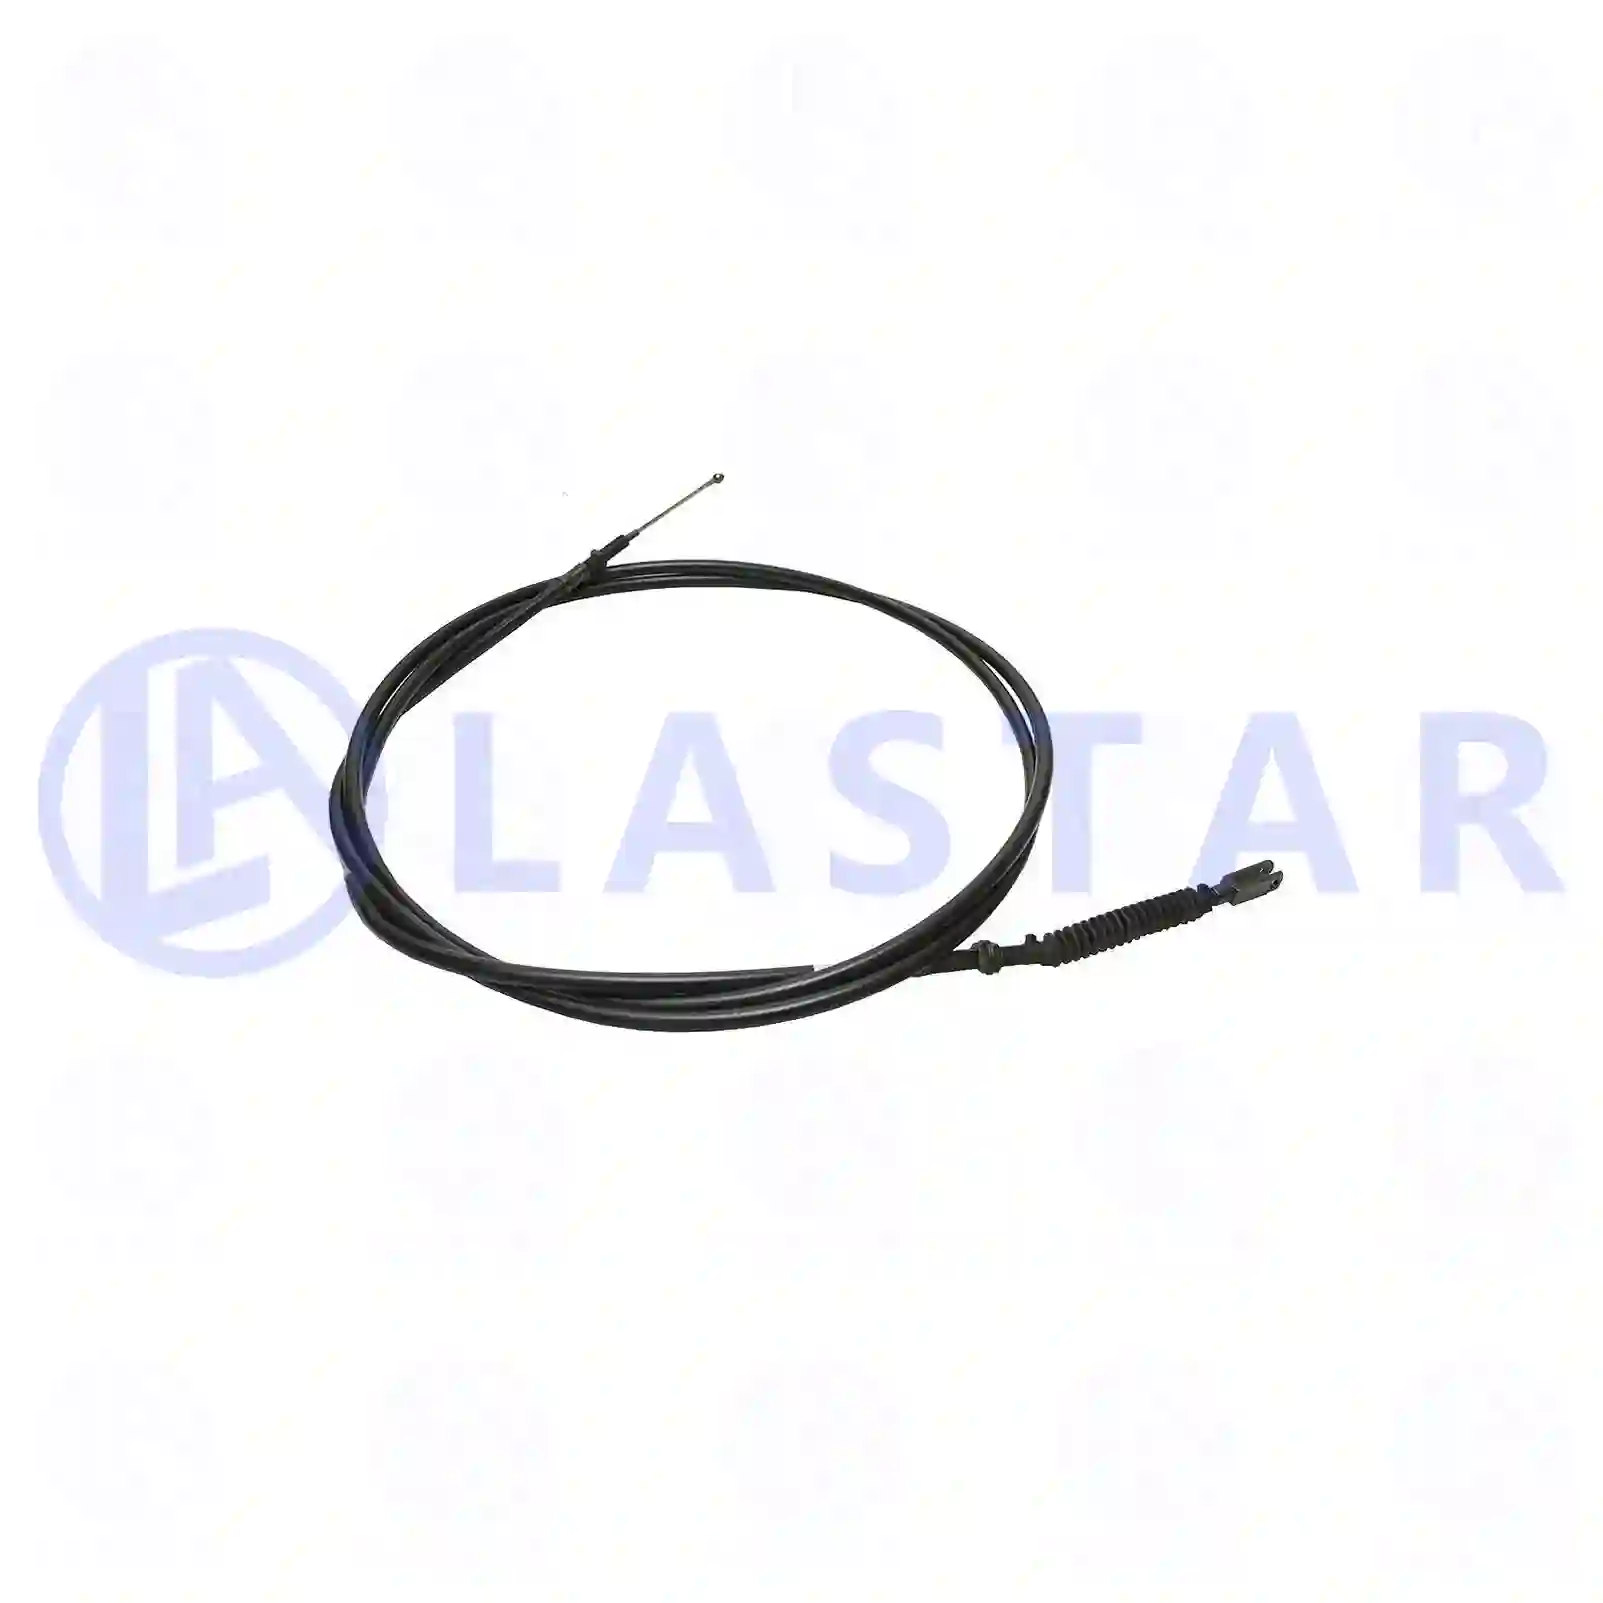 Throttle cable, 77704623, 1407992, 1414380, 1428936, 1431228, ZG02198-0008 ||  77704623 Lastar Spare Part | Truck Spare Parts, Auotomotive Spare Parts Throttle cable, 77704623, 1407992, 1414380, 1428936, 1431228, ZG02198-0008 ||  77704623 Lastar Spare Part | Truck Spare Parts, Auotomotive Spare Parts